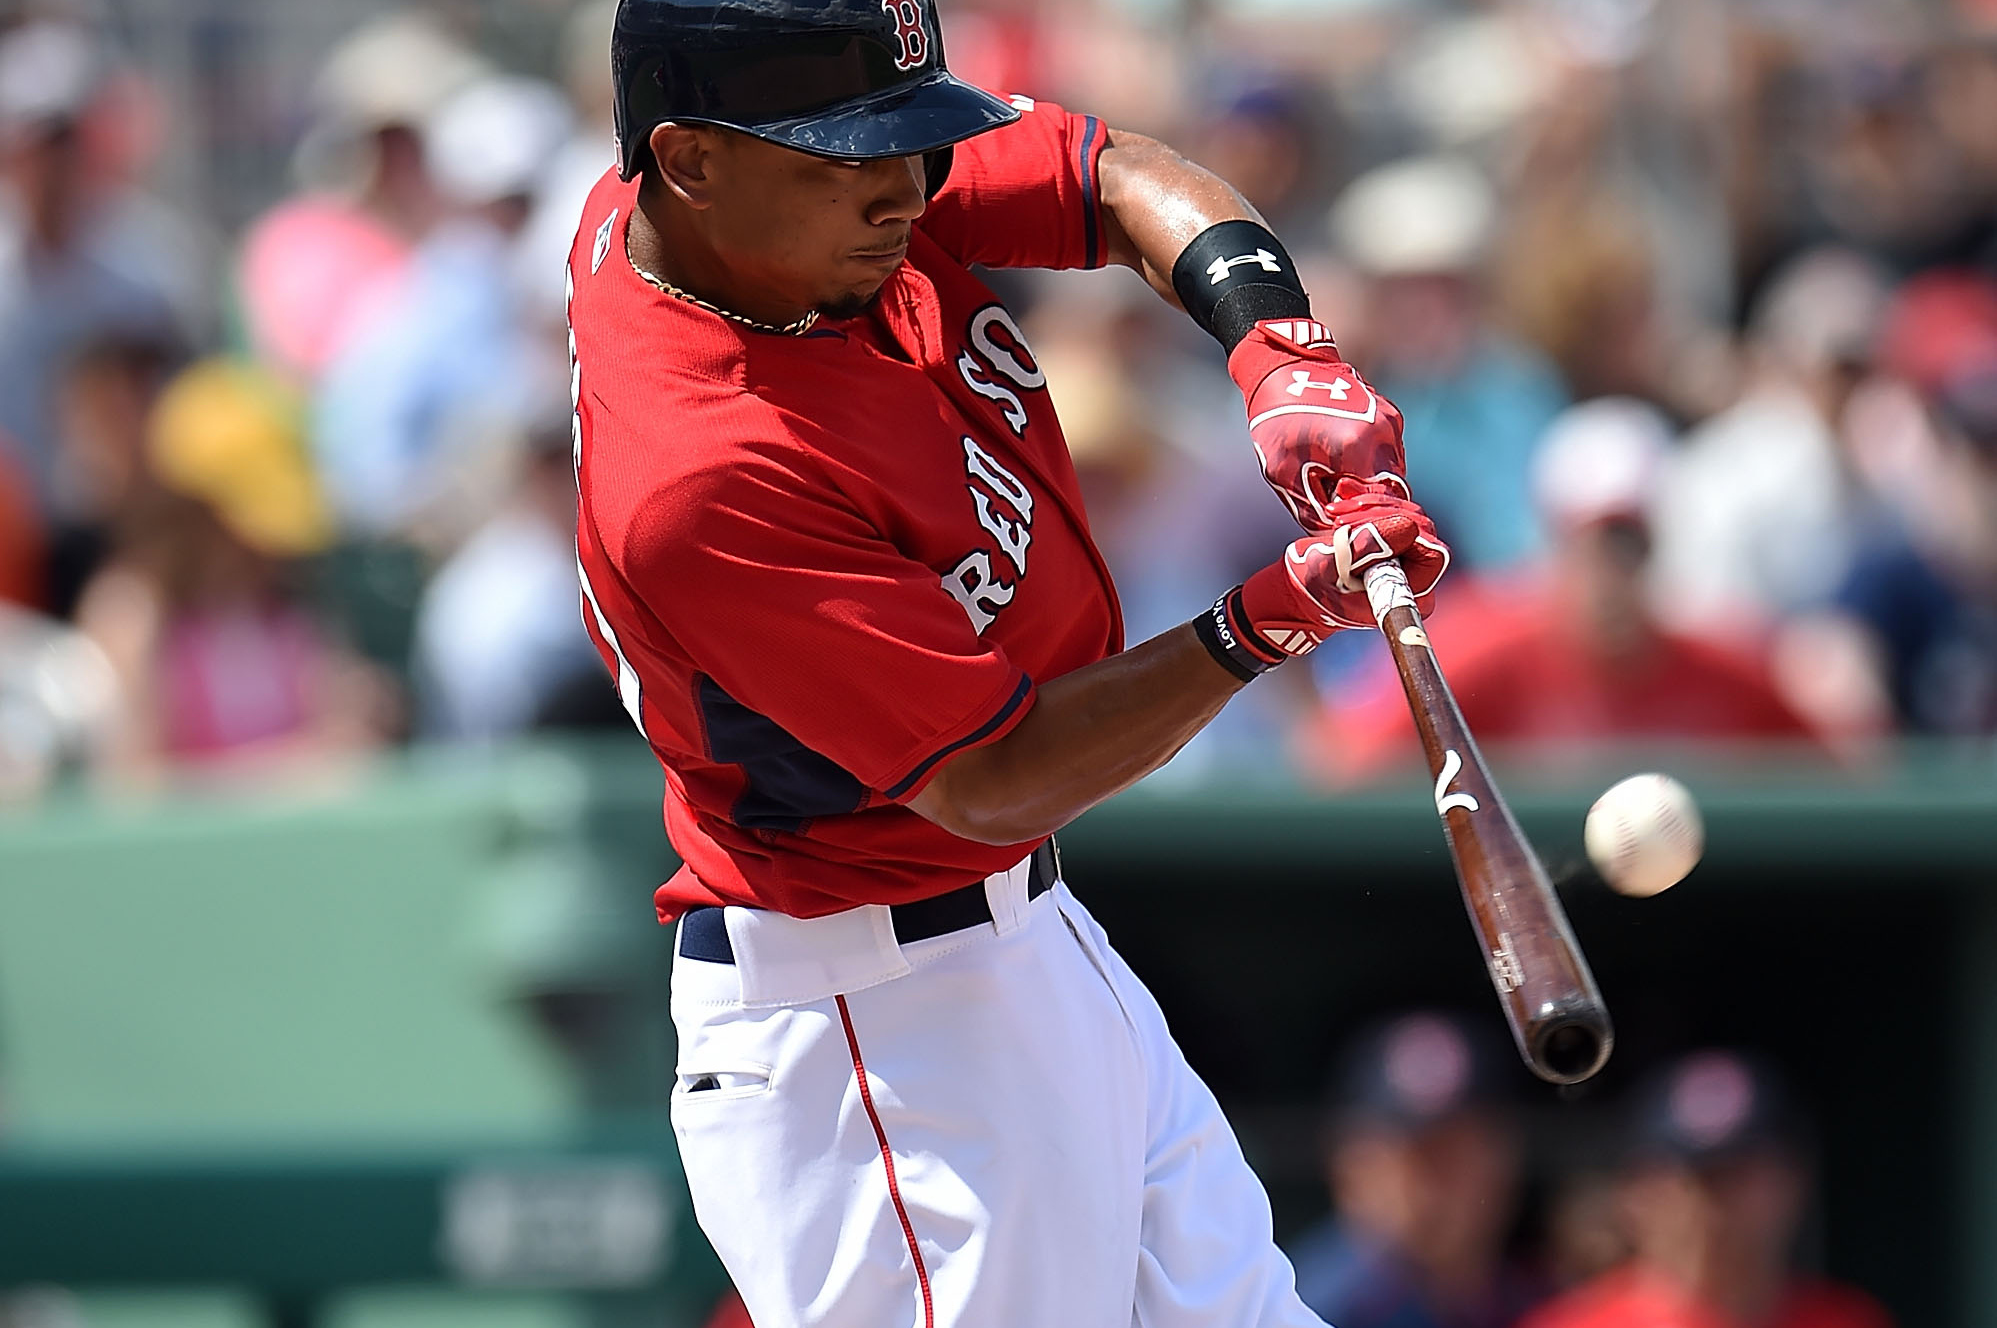 Boston Red Sox: With Mookie Betts in Center, Sox Have Terrific